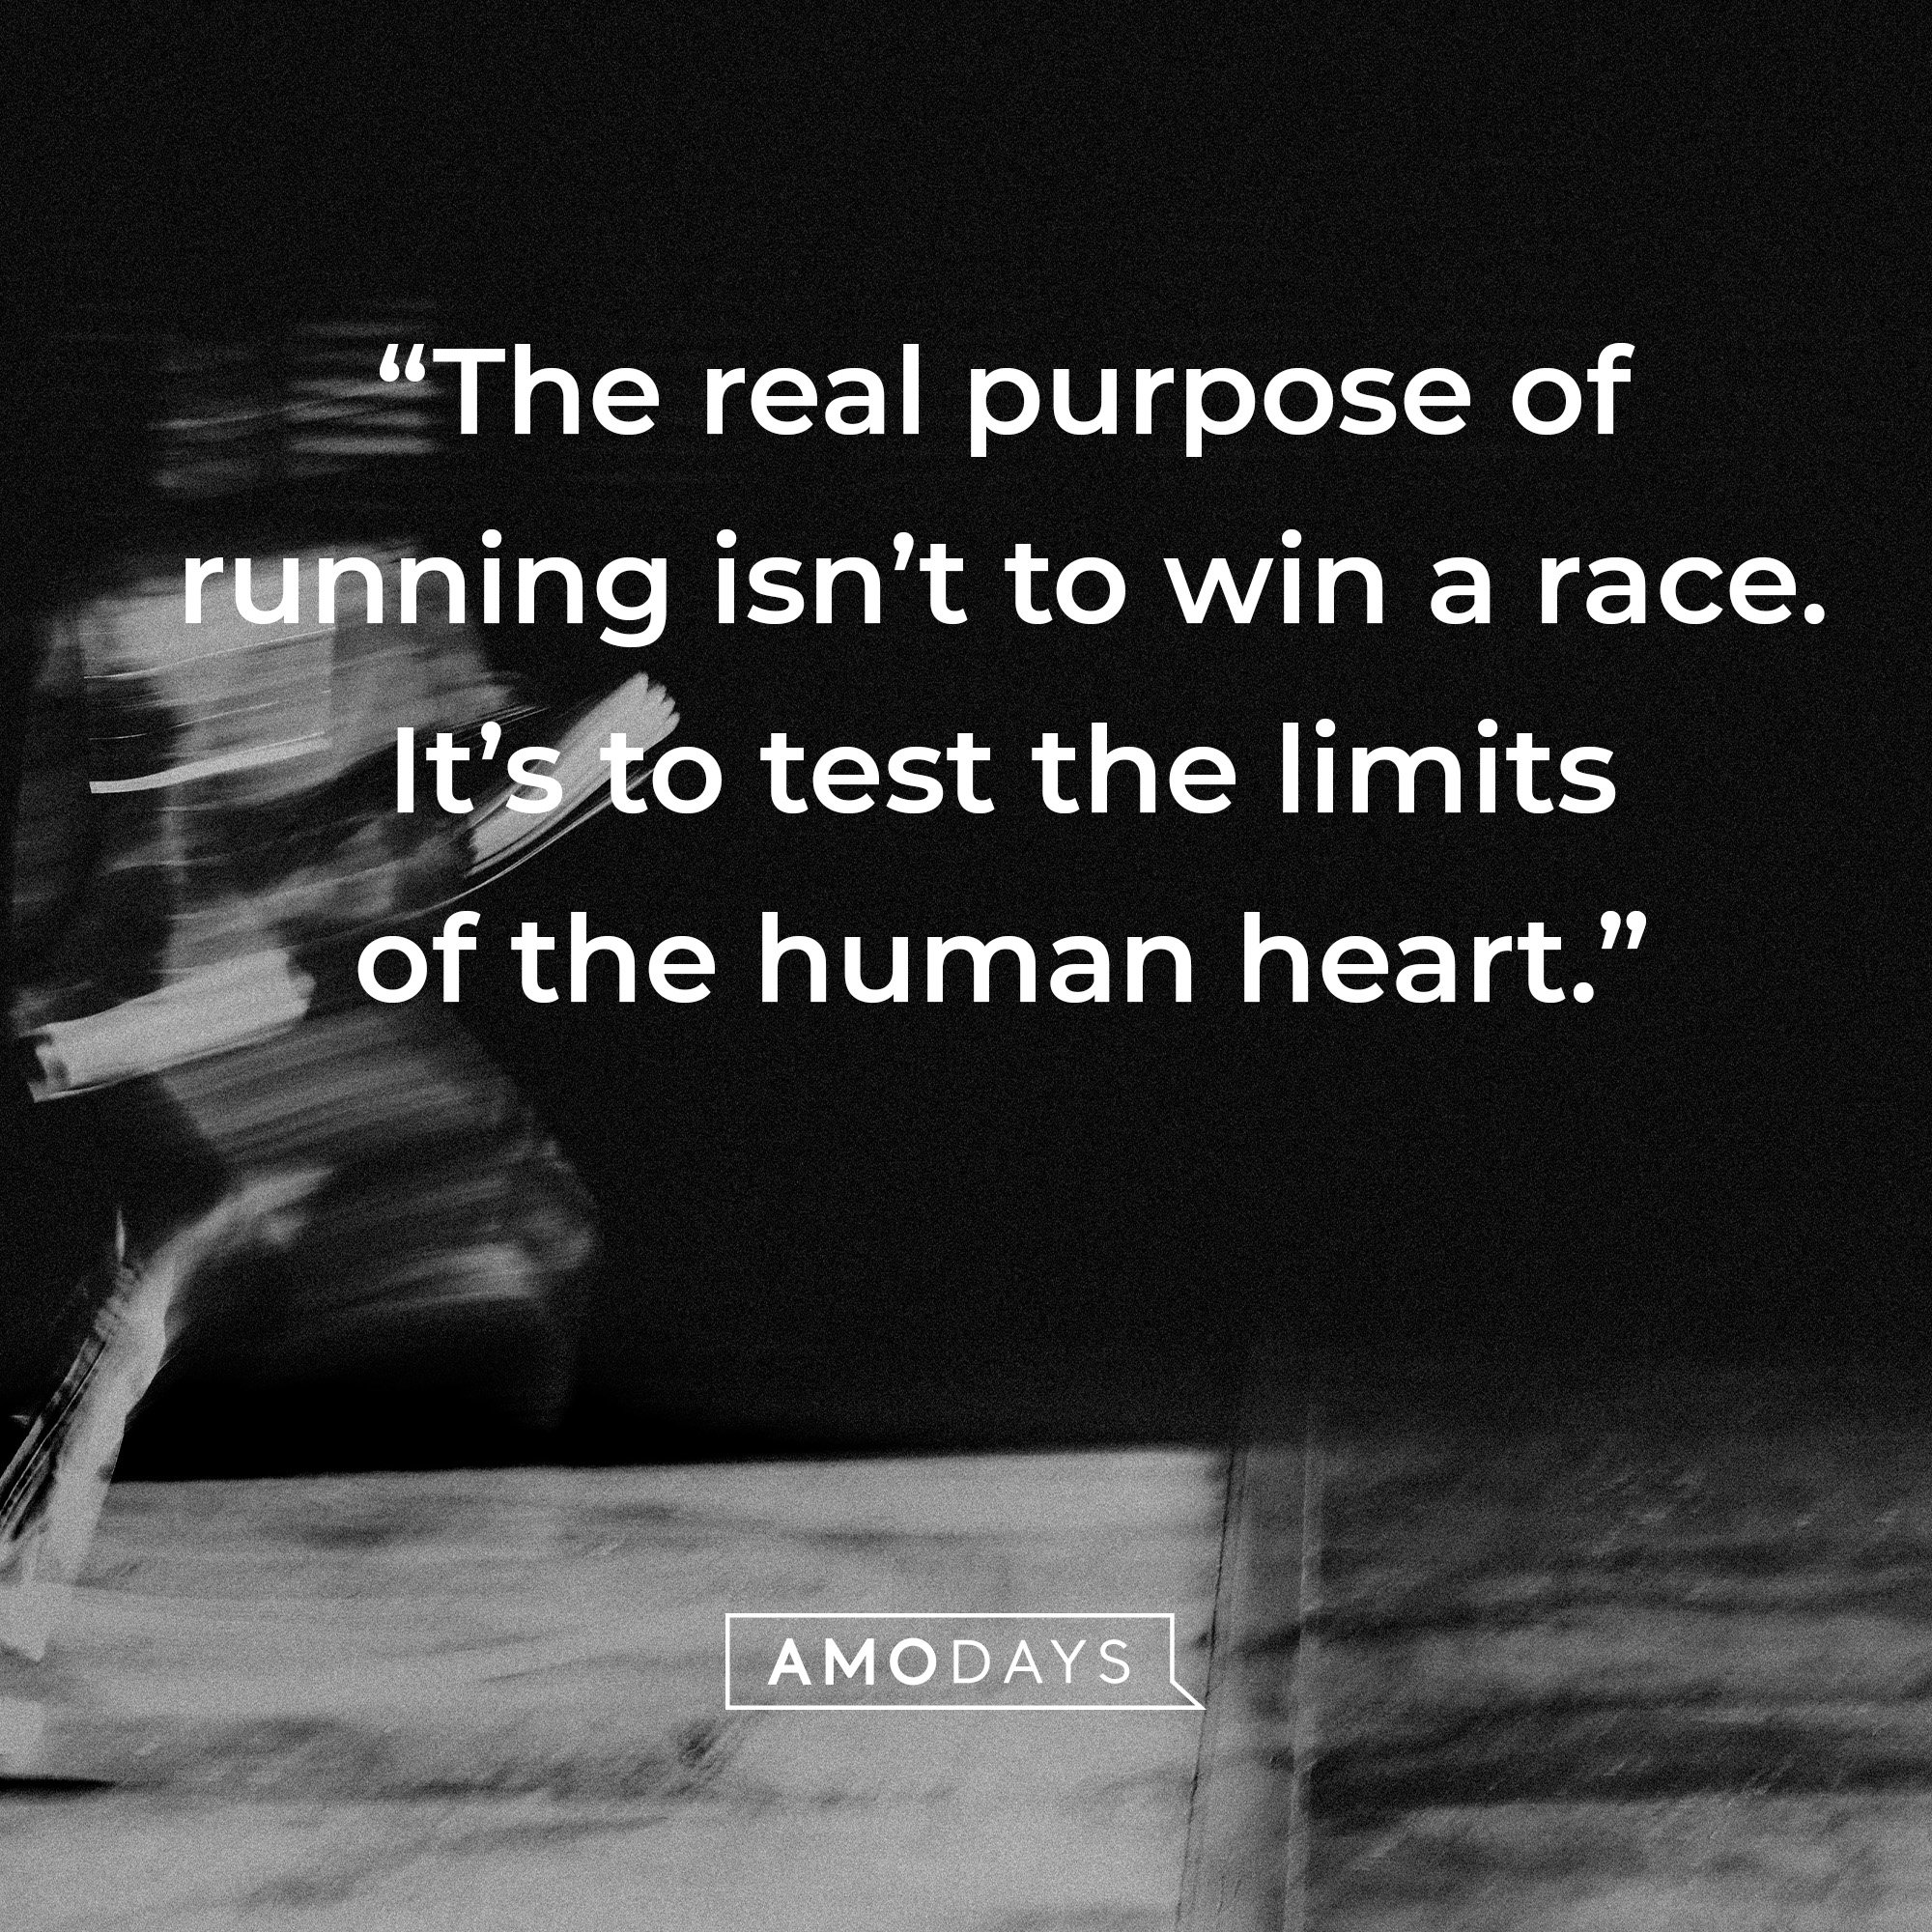 Nike’s quote: “The real purpose of running isn’t to win a race. It’s to test the limits of the human heart.” | Source: AmoDays